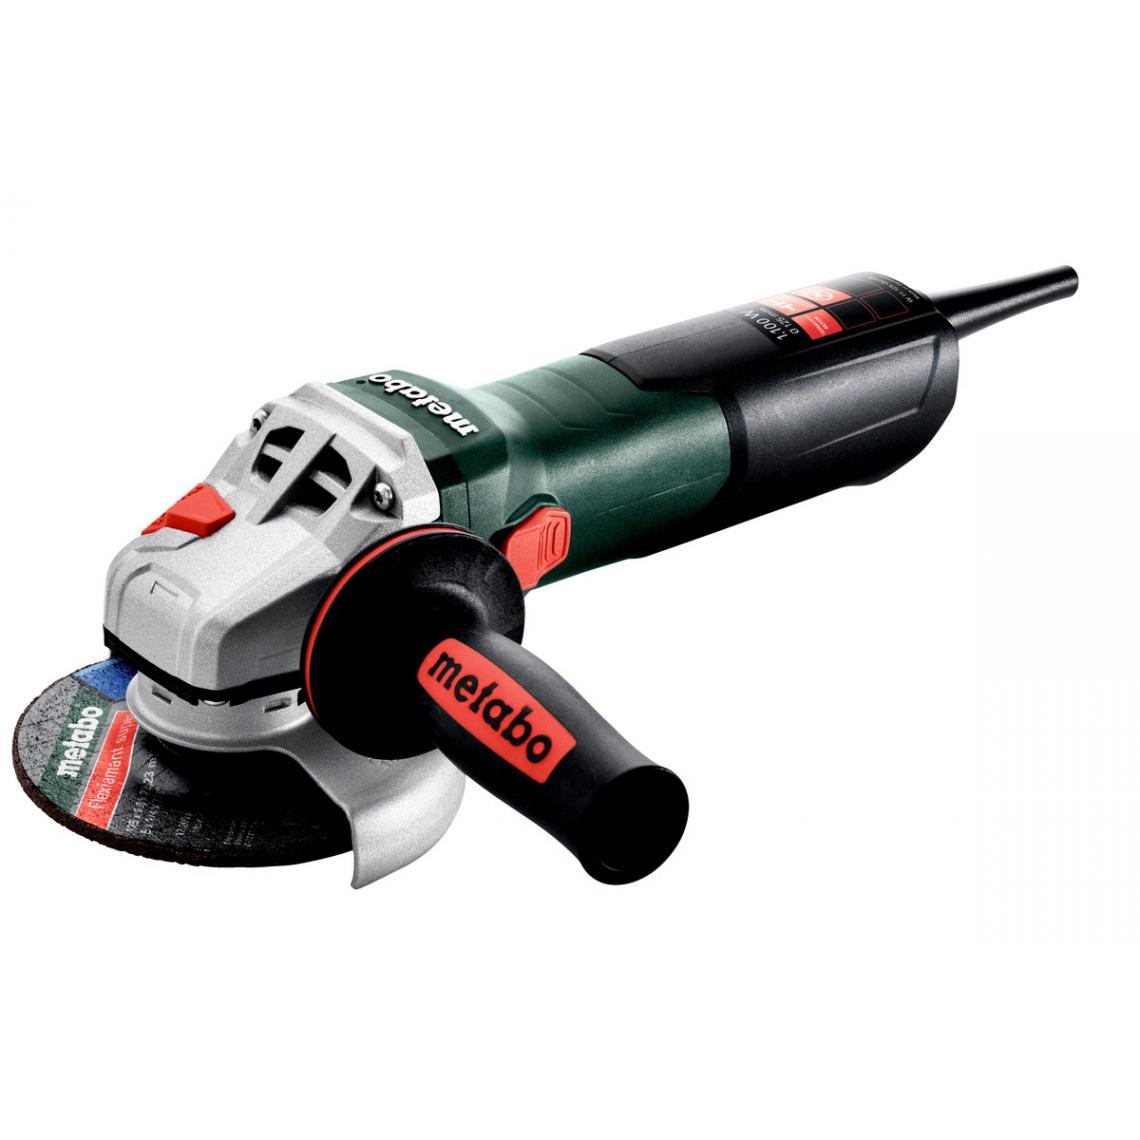 Metabo - Meuleuse Ø125 mm filaire W 11-125 QUICK METABO - 603623000 - Meuleuses